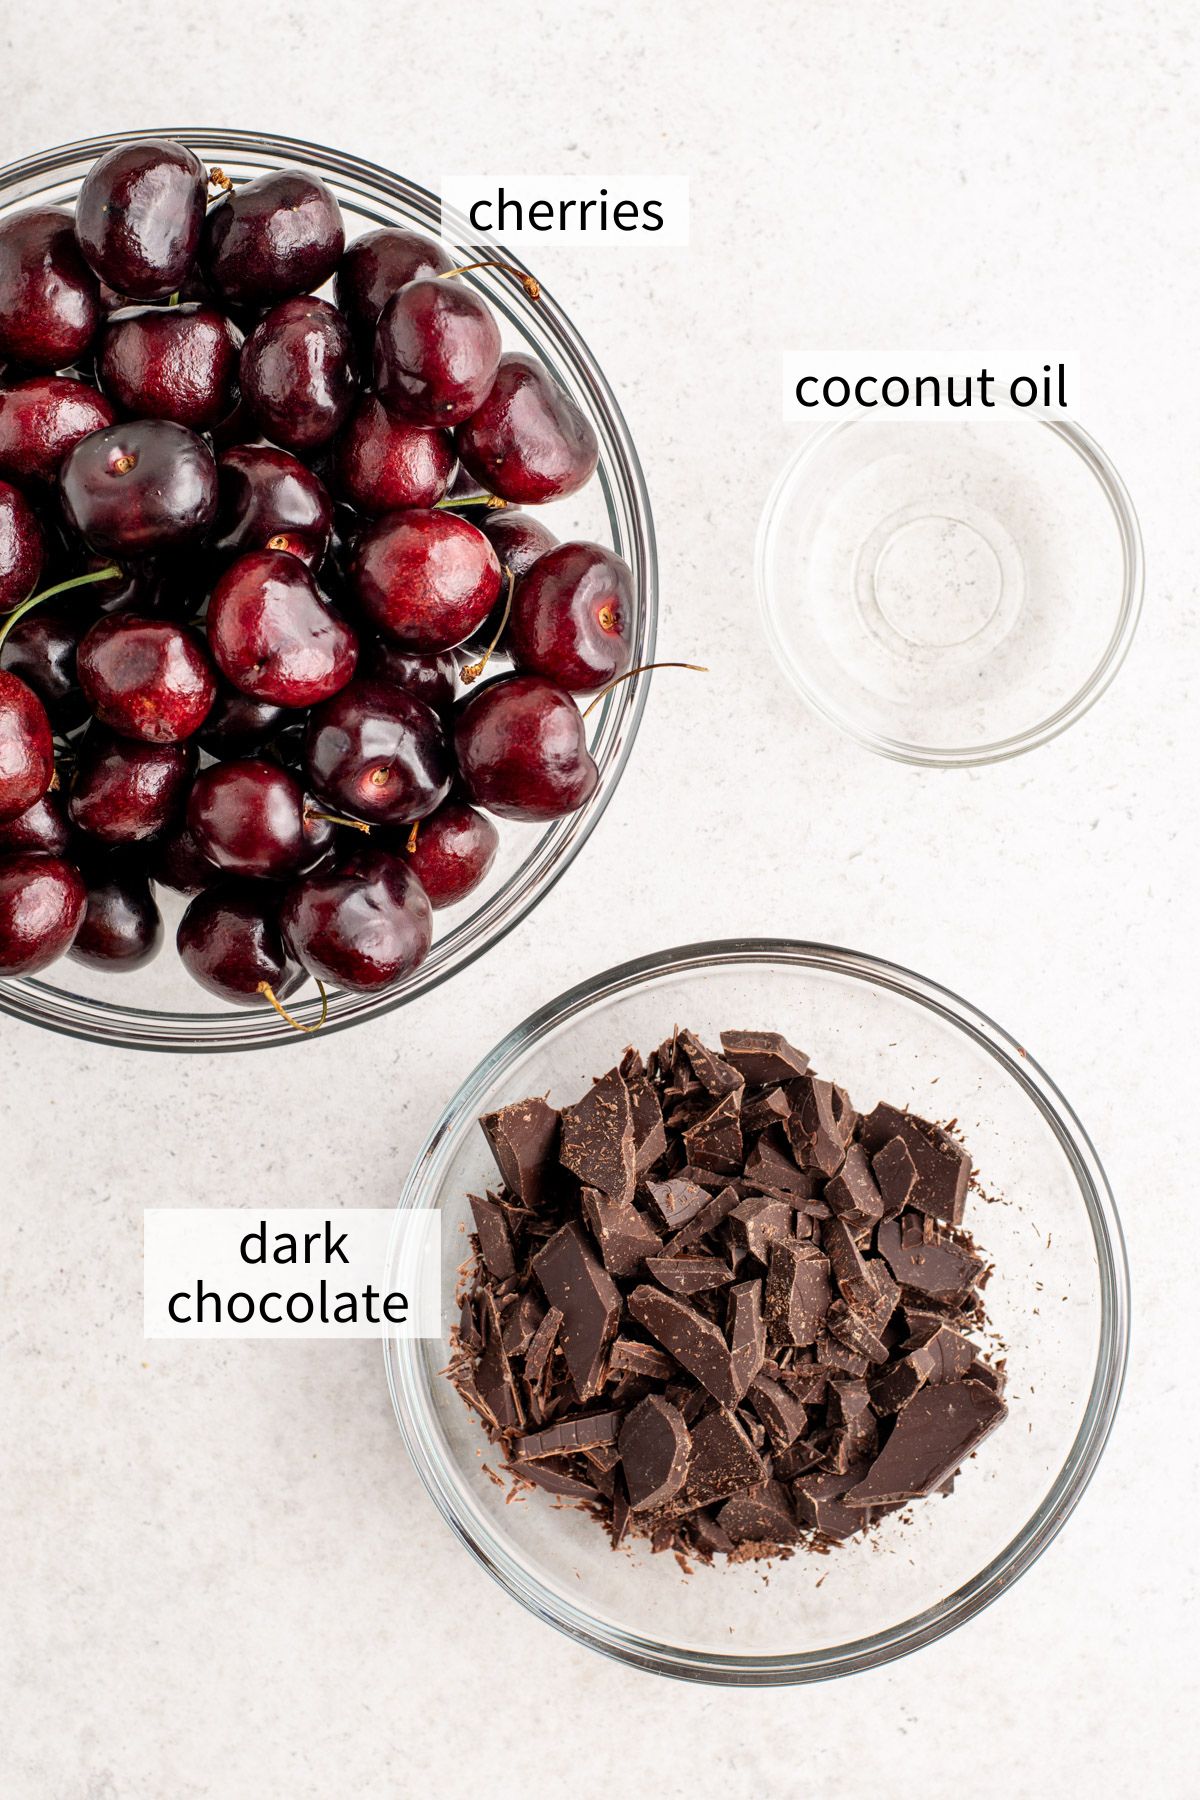 ingredients to make chocolate covered cherries.